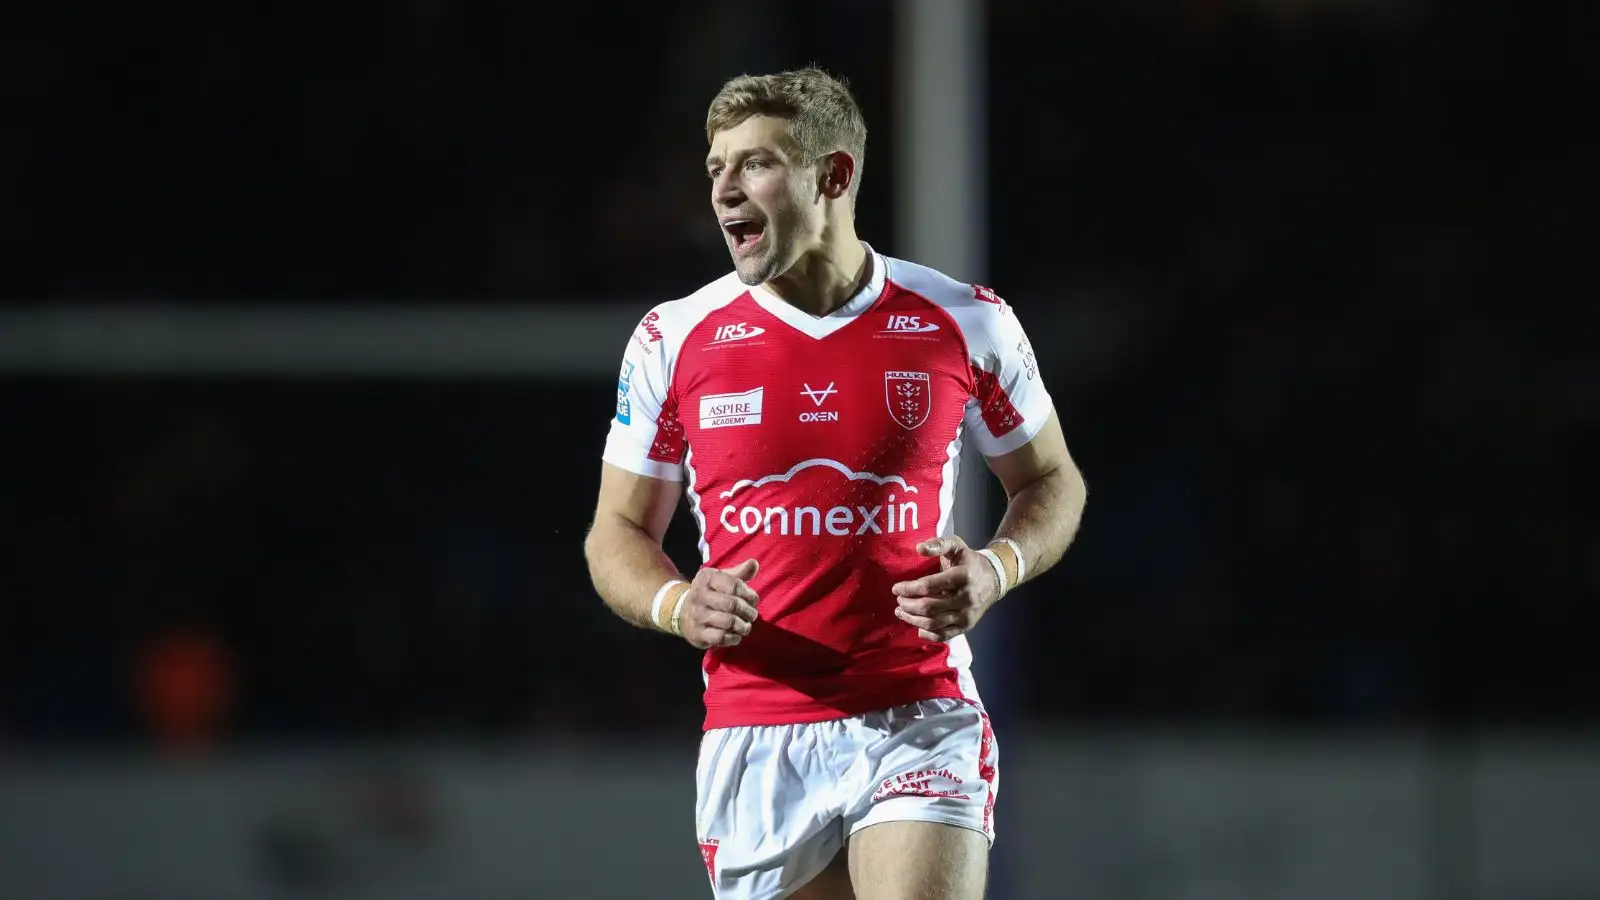 Hull KR utility Jimmy Keinhorst makes permanent Championship move: ‘A really important signing for us’